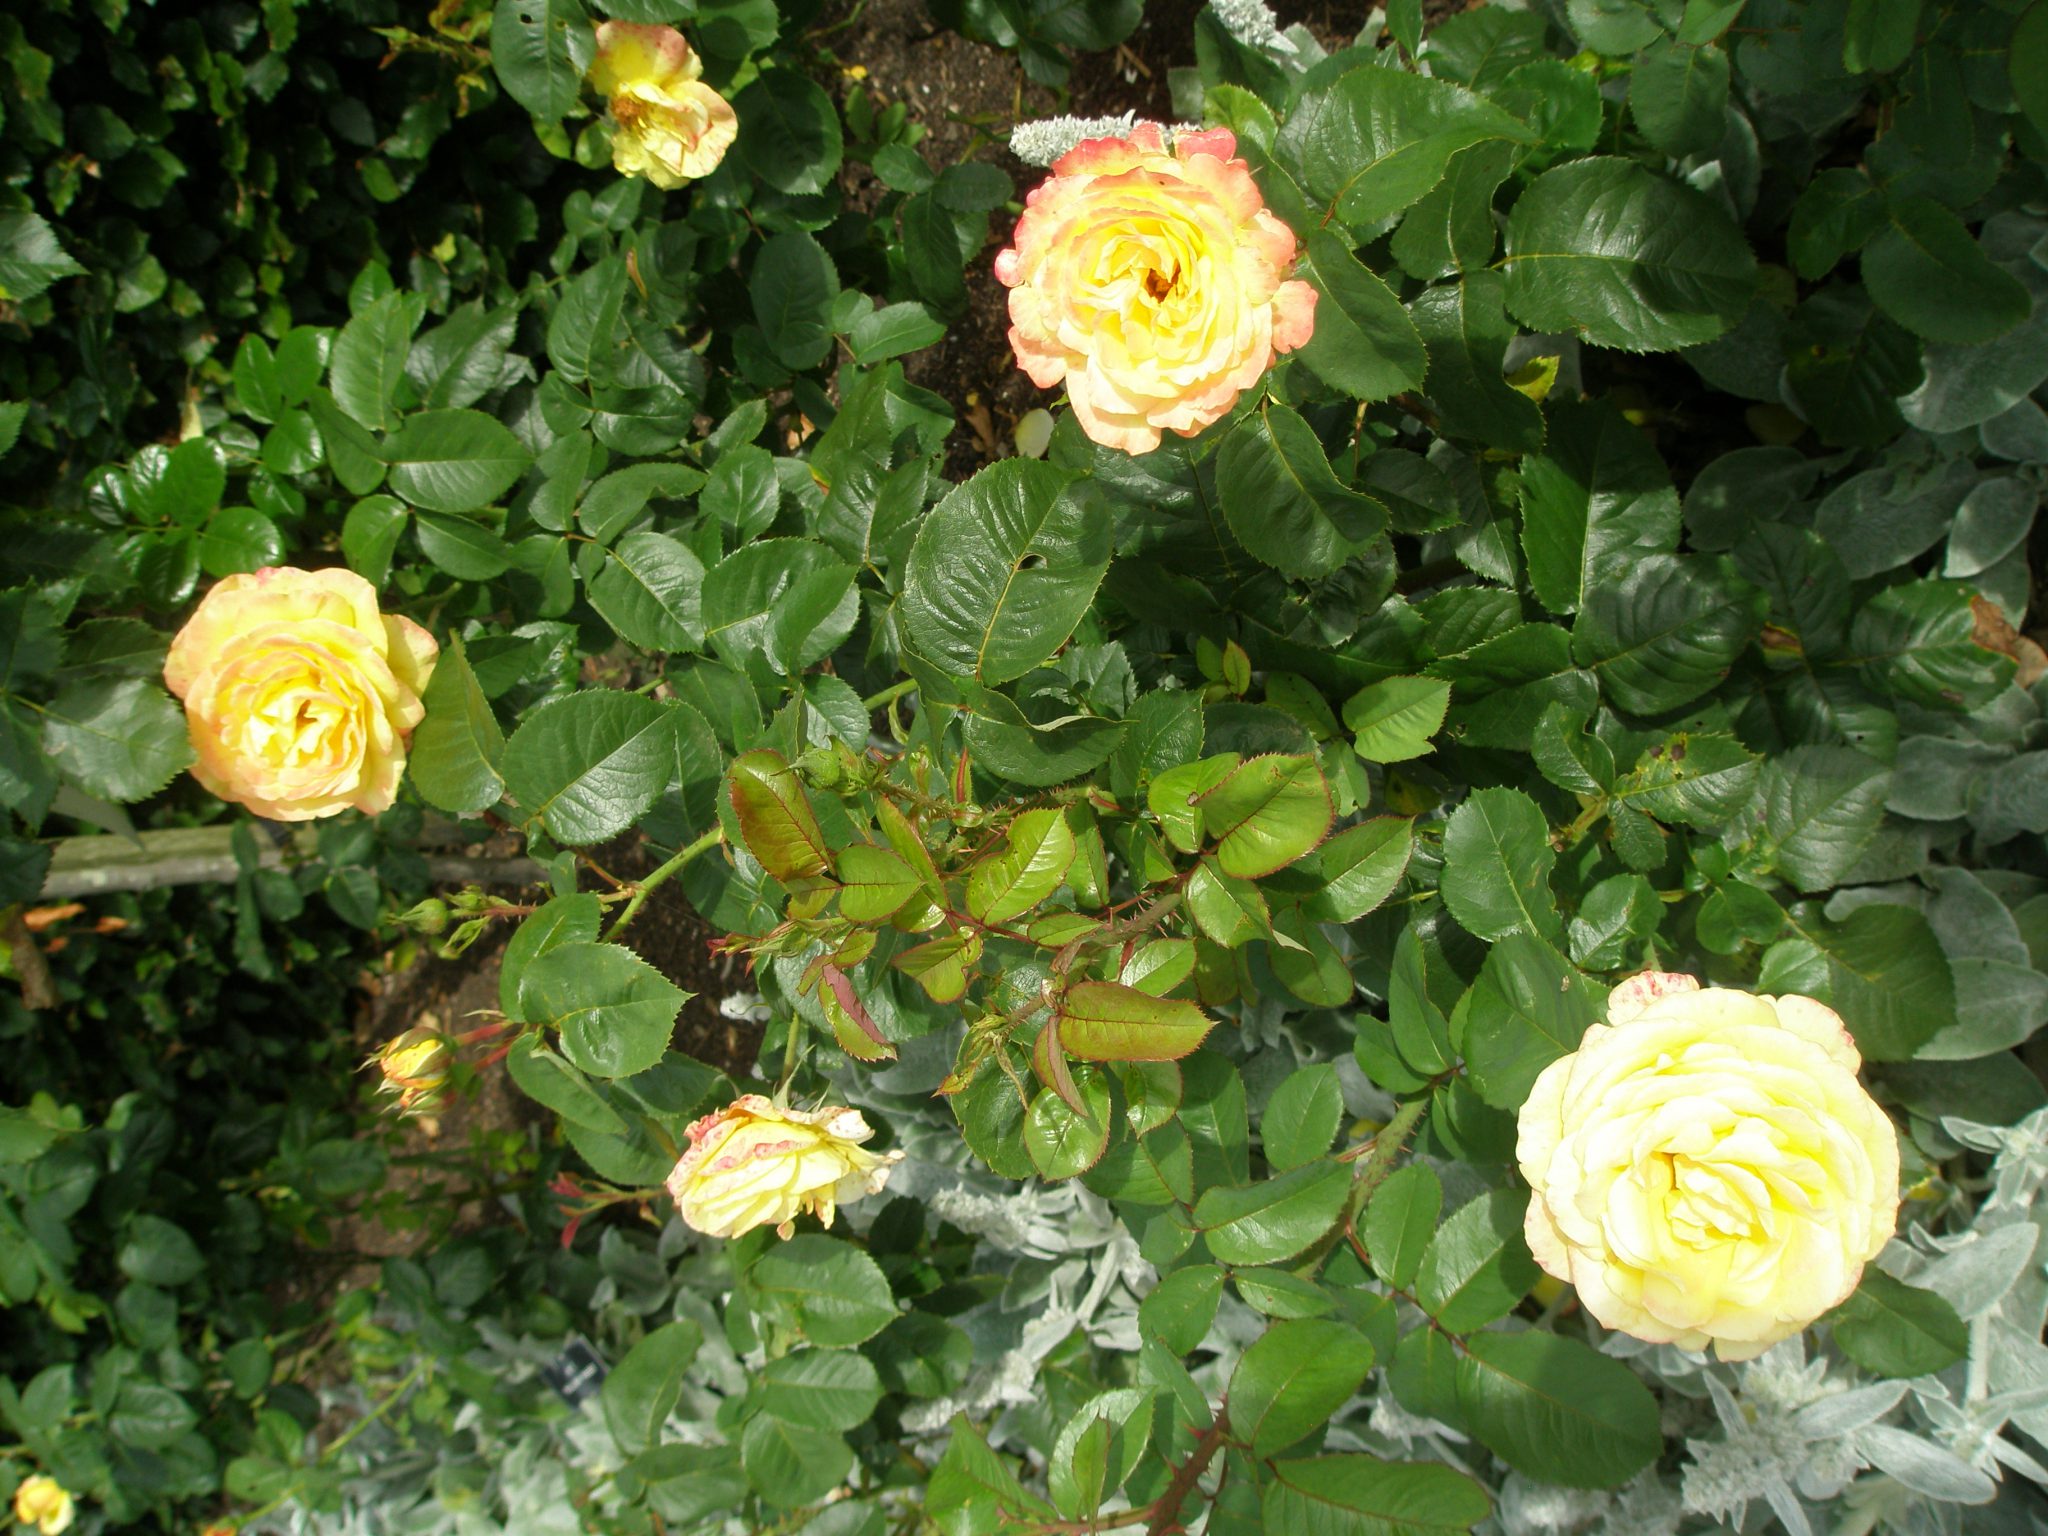 Yellow roses along the Gold Rose Avenue